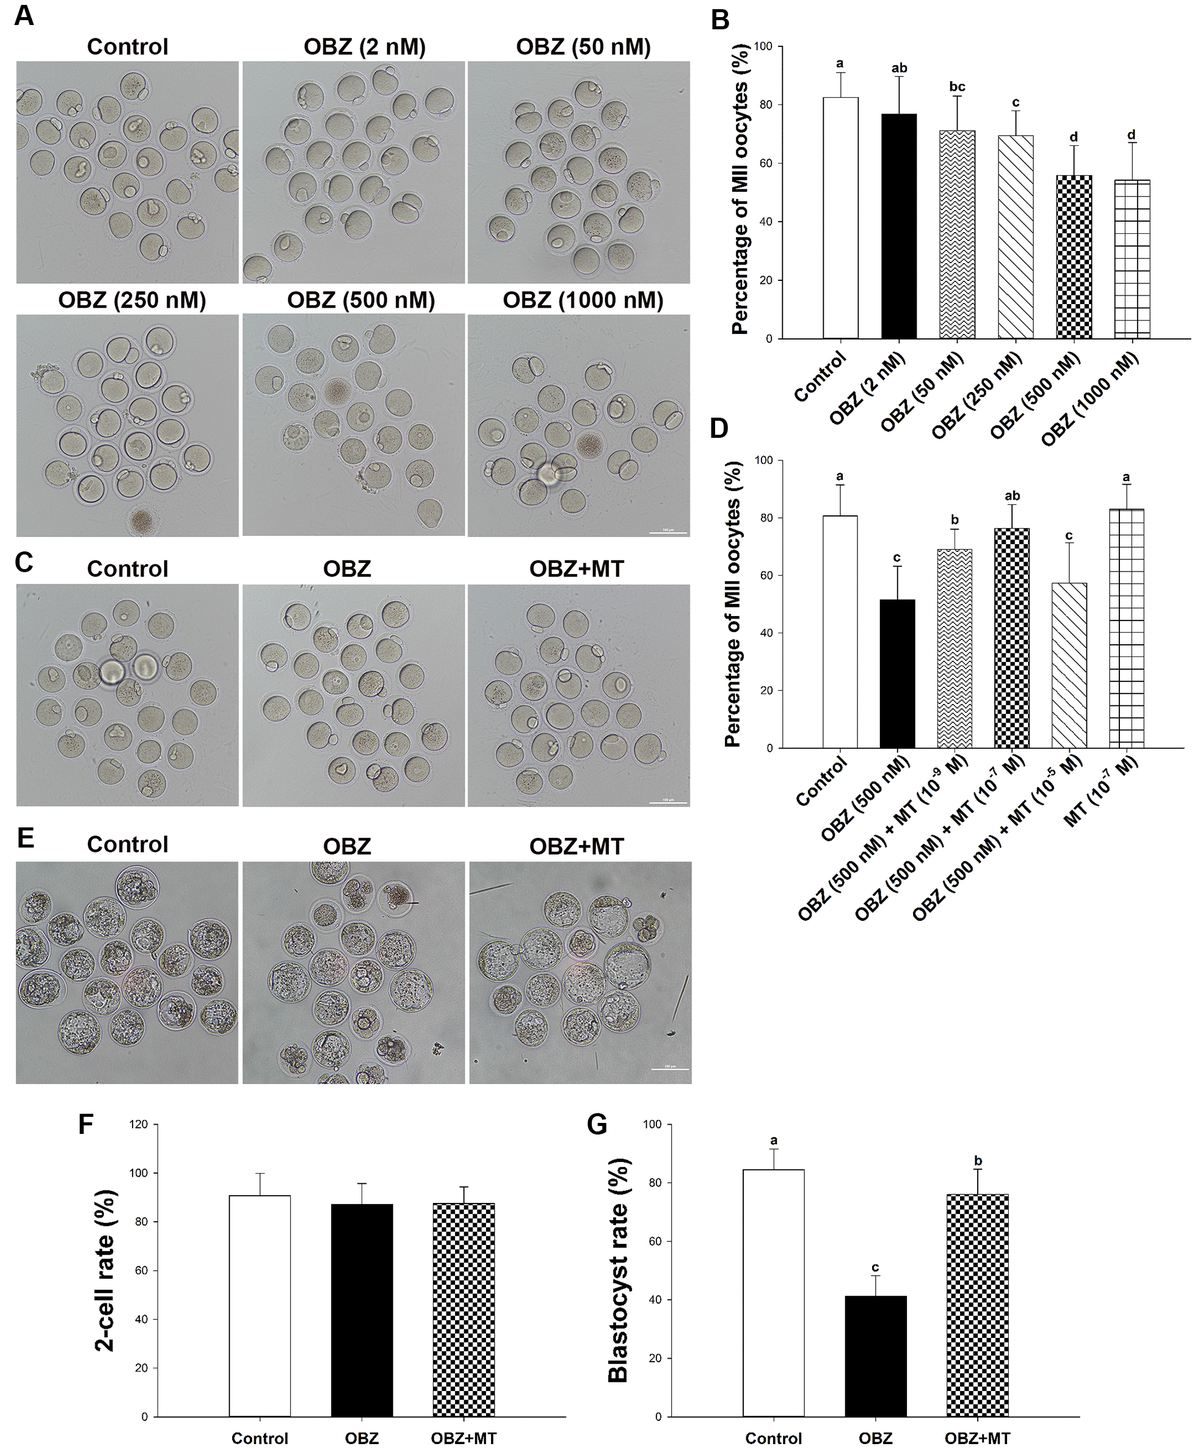 Effects of melatonin on mouse oocytes and embryos following OBZ exposure in vitro. (A) Representative images of oocytes that extruded the first polar body (PB1) in the control and OBZ-exposed groups. Scale bar, 100 μm. (B) Polar body extrusion (PBE) rate in different treatment groups. (C) The mouse oocyte morphologies in the control, OBZ, and OBZ+MT groups. Scale bar, 100 μm. (D) The effects of gradient concentrations of melatonin on the rate of PBE in OBZ-exposed oocytes. (E-G) Mouse embryo morphologies (E) and embryo development rate (F, G) from the 2-cell to blastocyst stages in the control, OBZ, and OBZ+MT groups. Values indicated by different letters are significantly different (P 